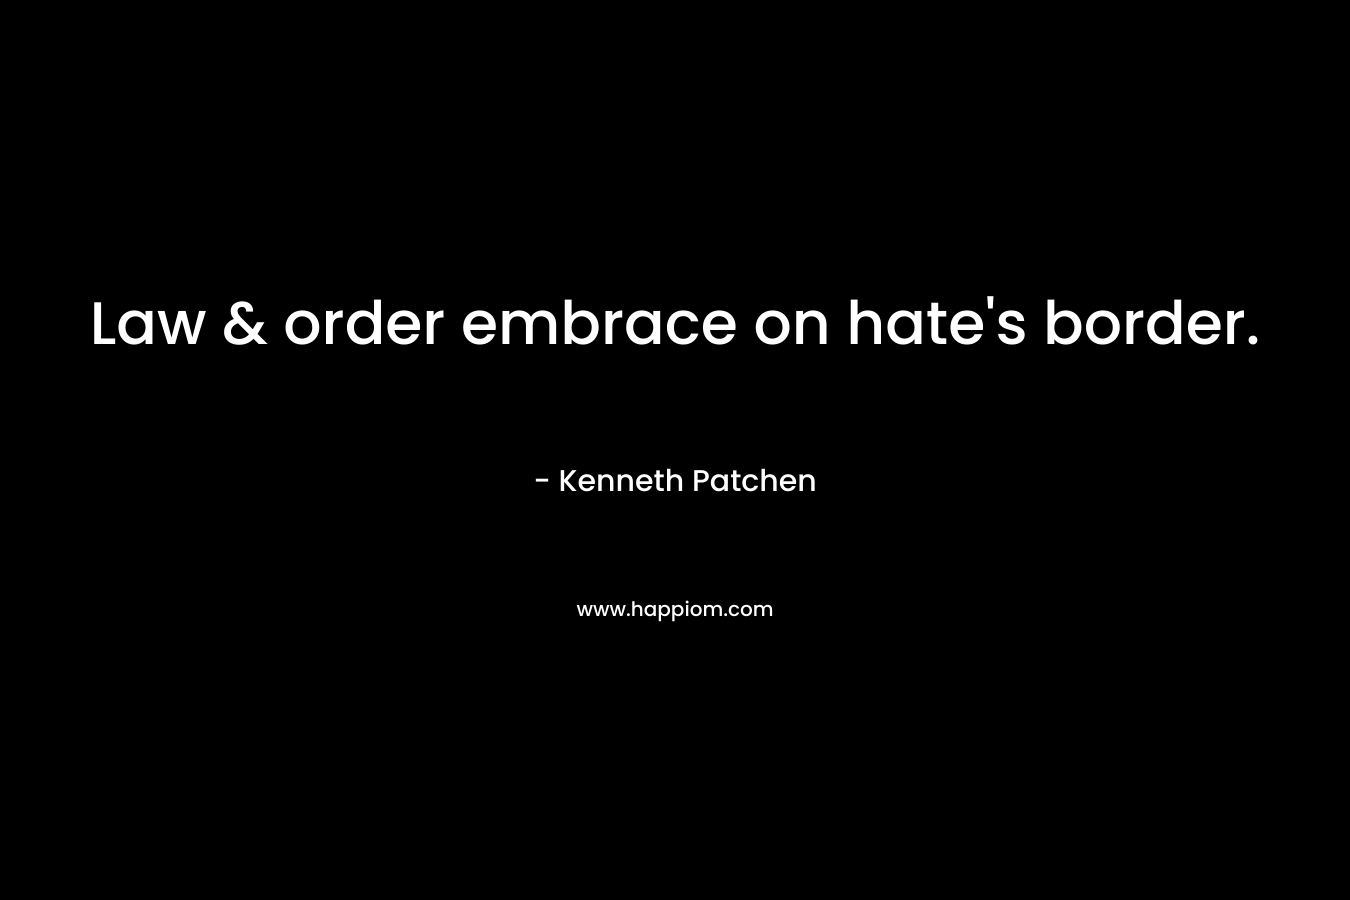 Law & order embrace on hate’s border. – Kenneth Patchen